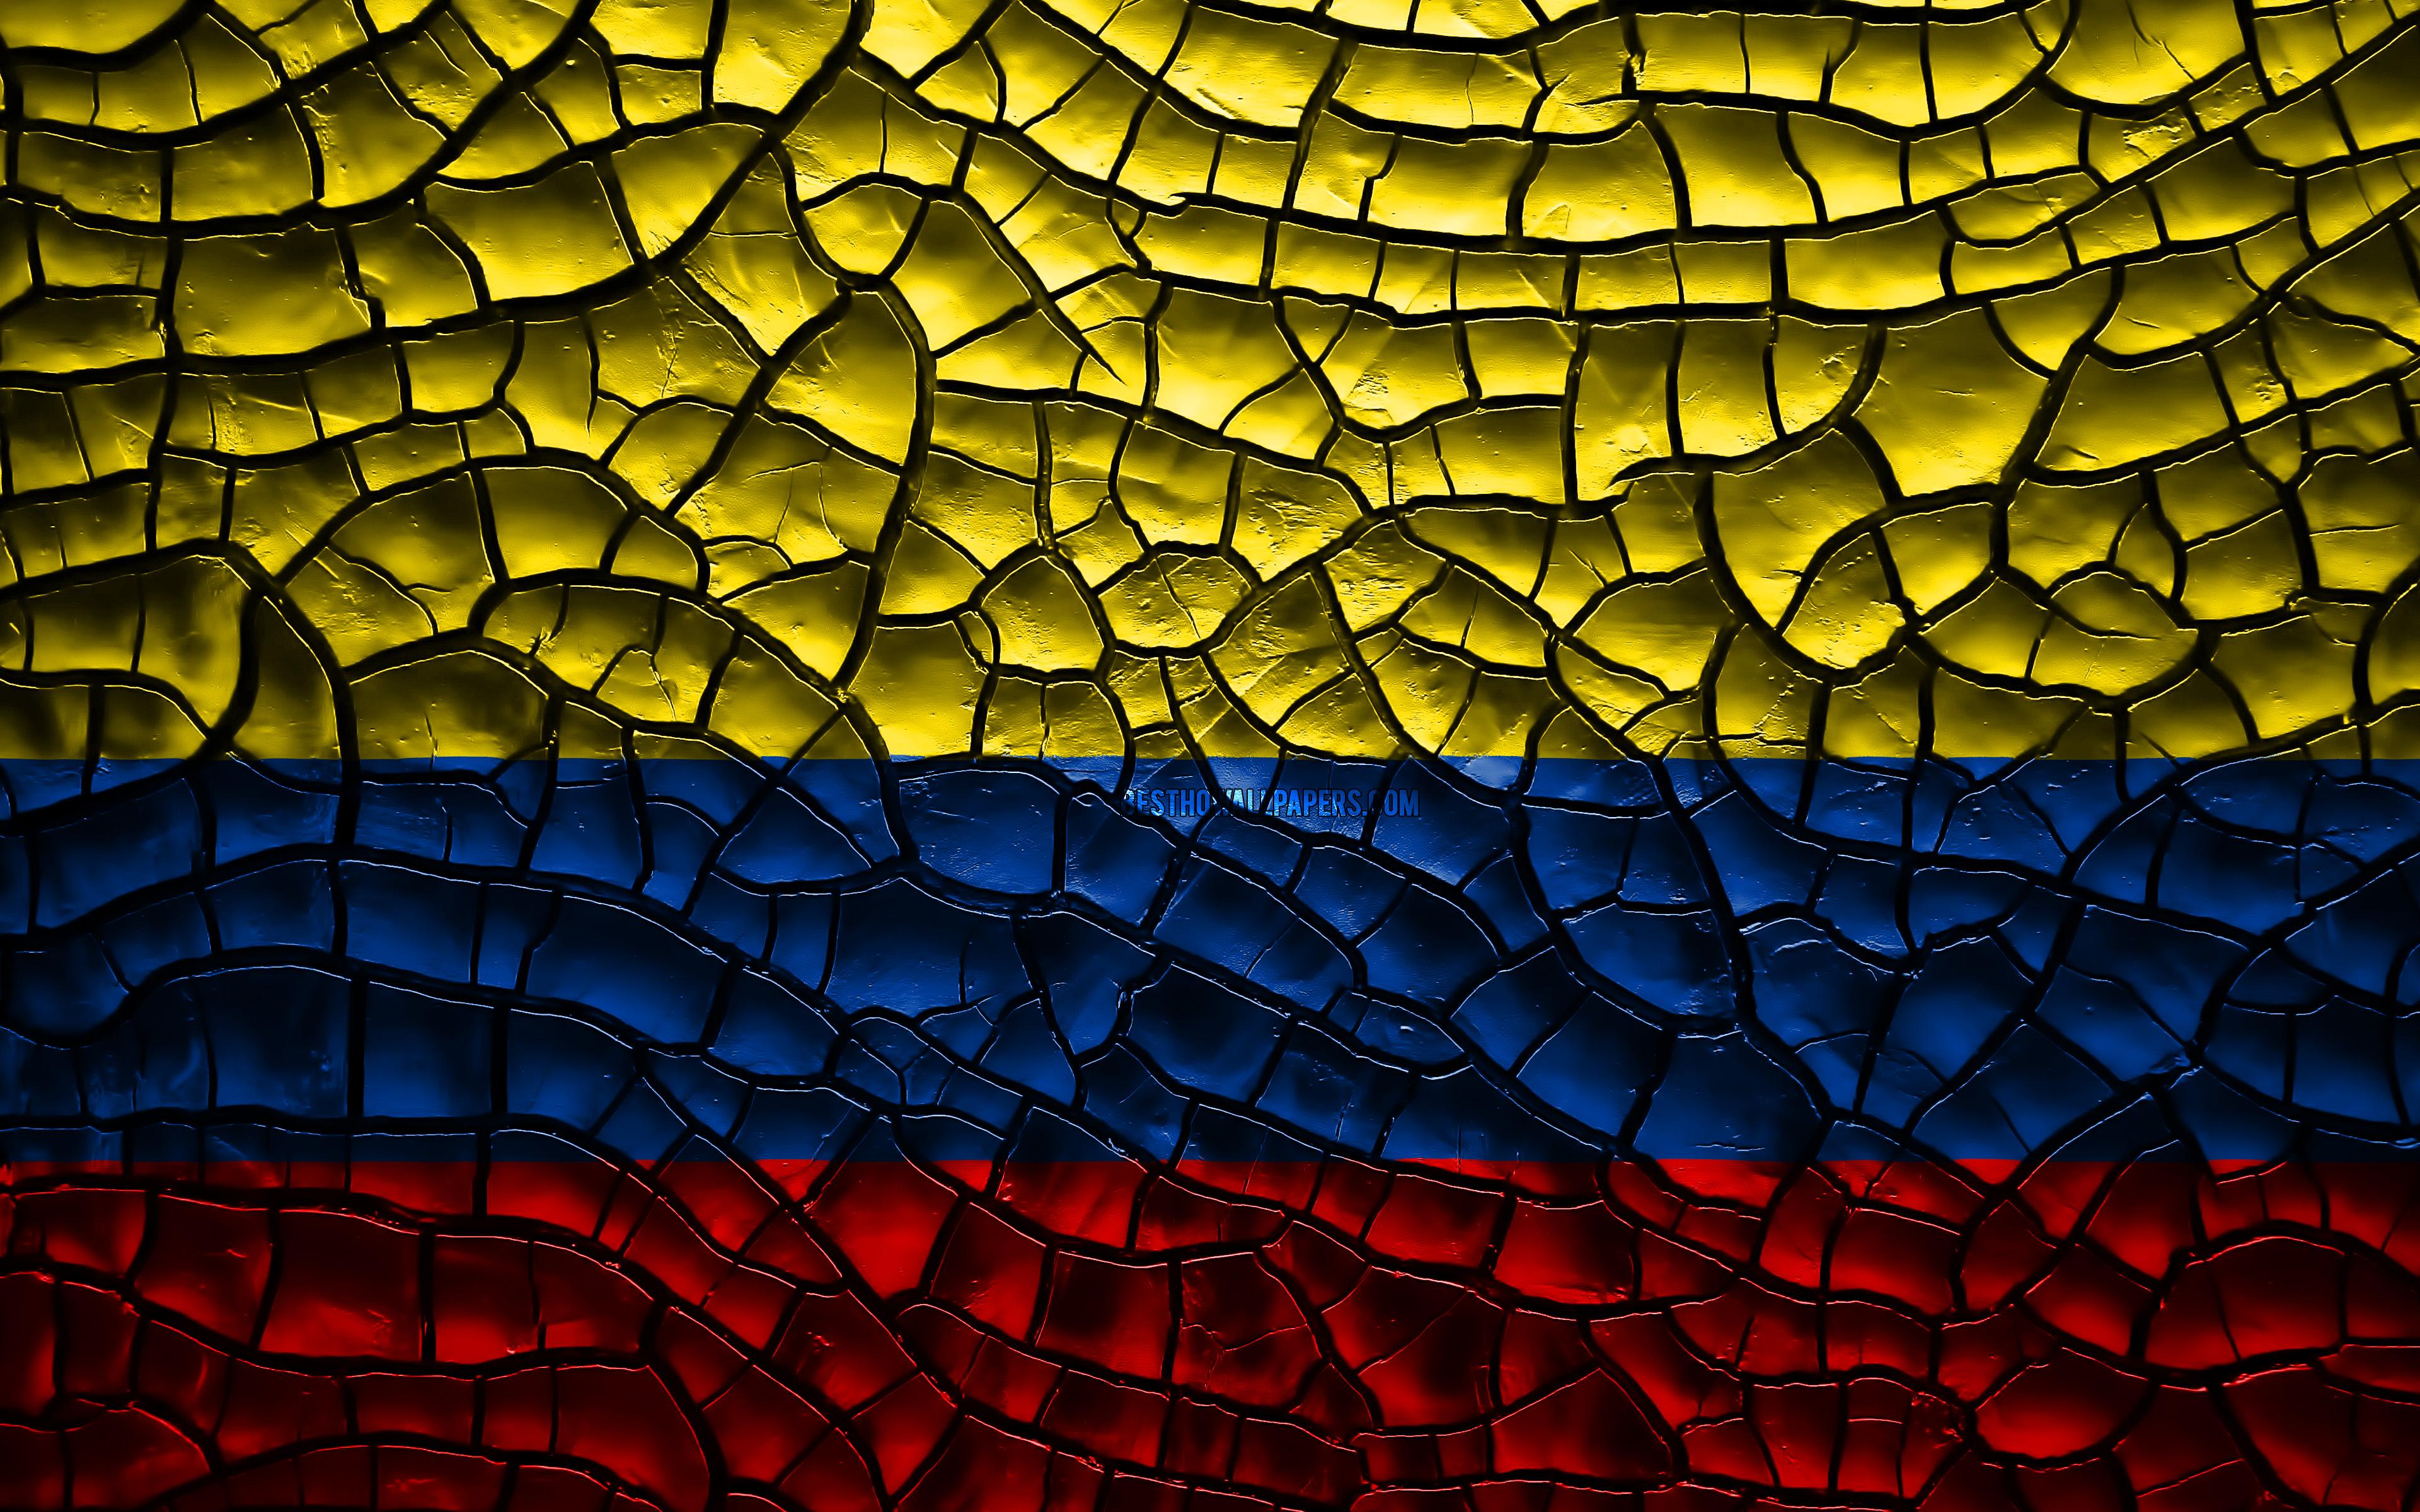 Download wallpaper Flag of Colombia, 4k, cracked soil